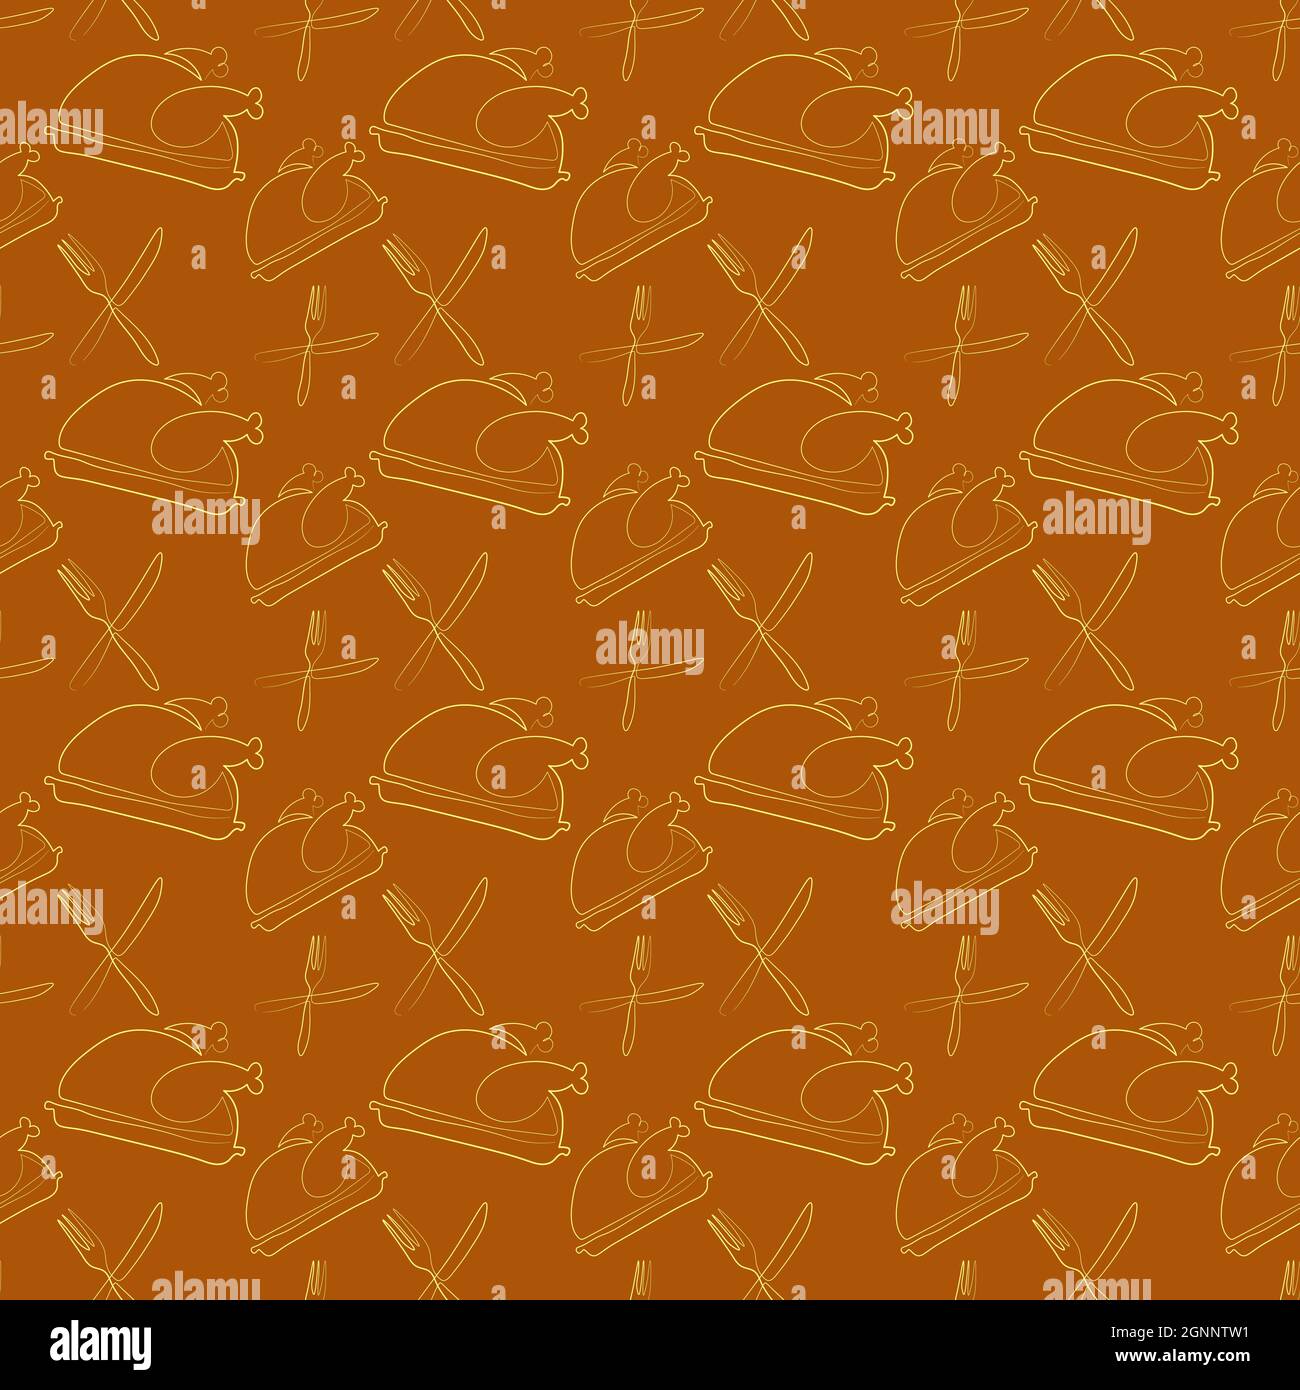 Seamless pattern with drawing in one line style turkey thanksgiving dinner serving Stock Vector